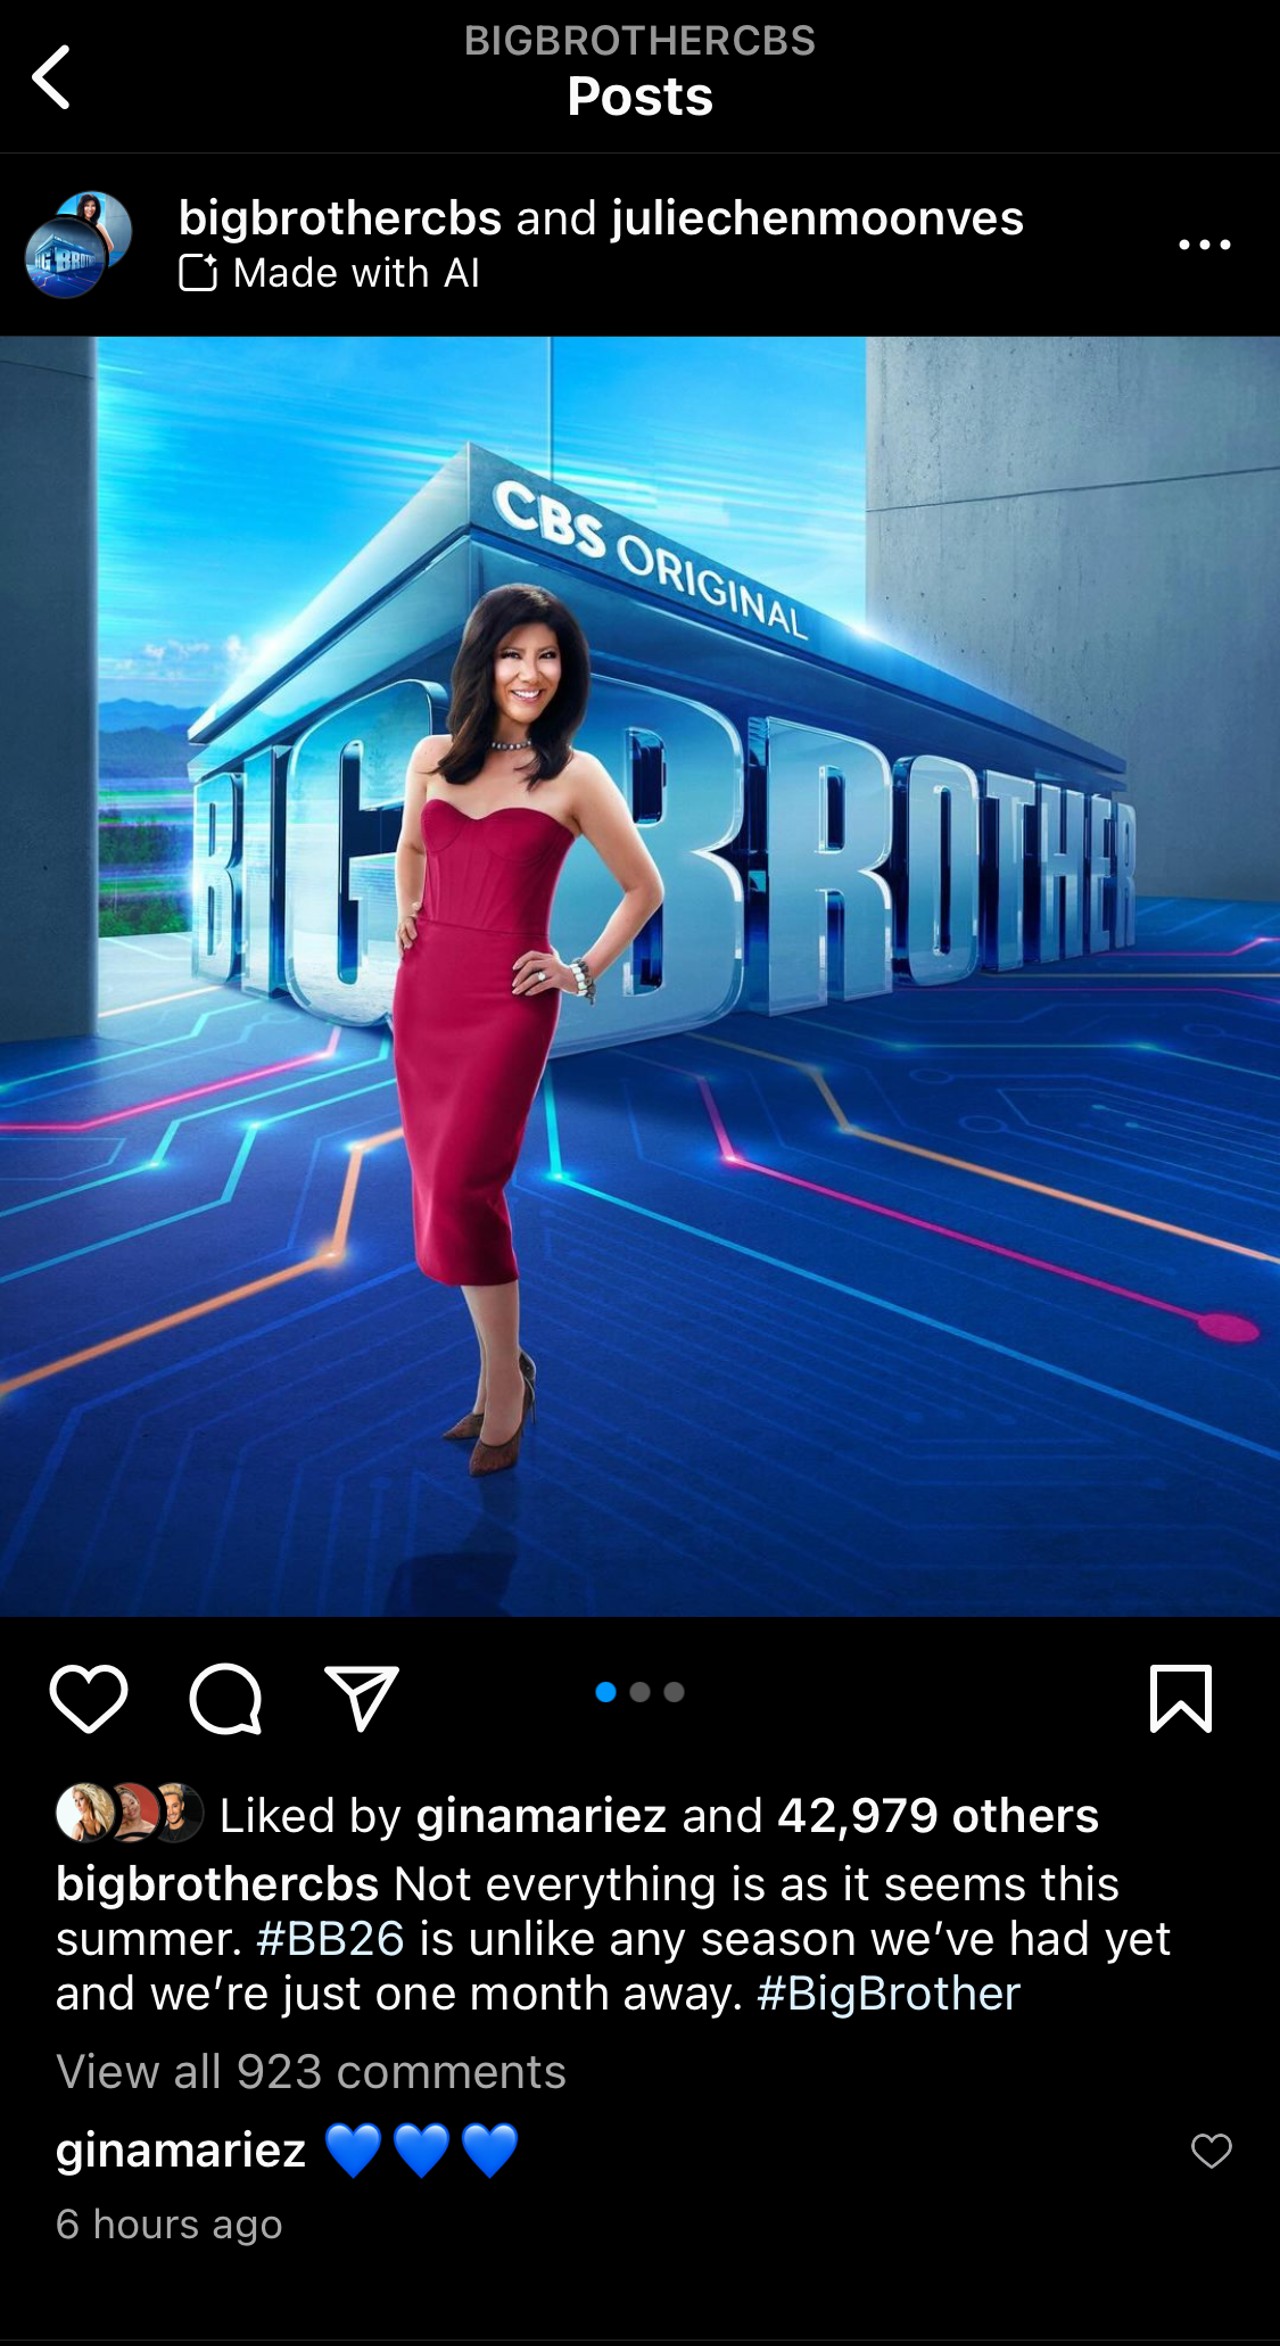 A screenshot from Big Brother's official Instagram page